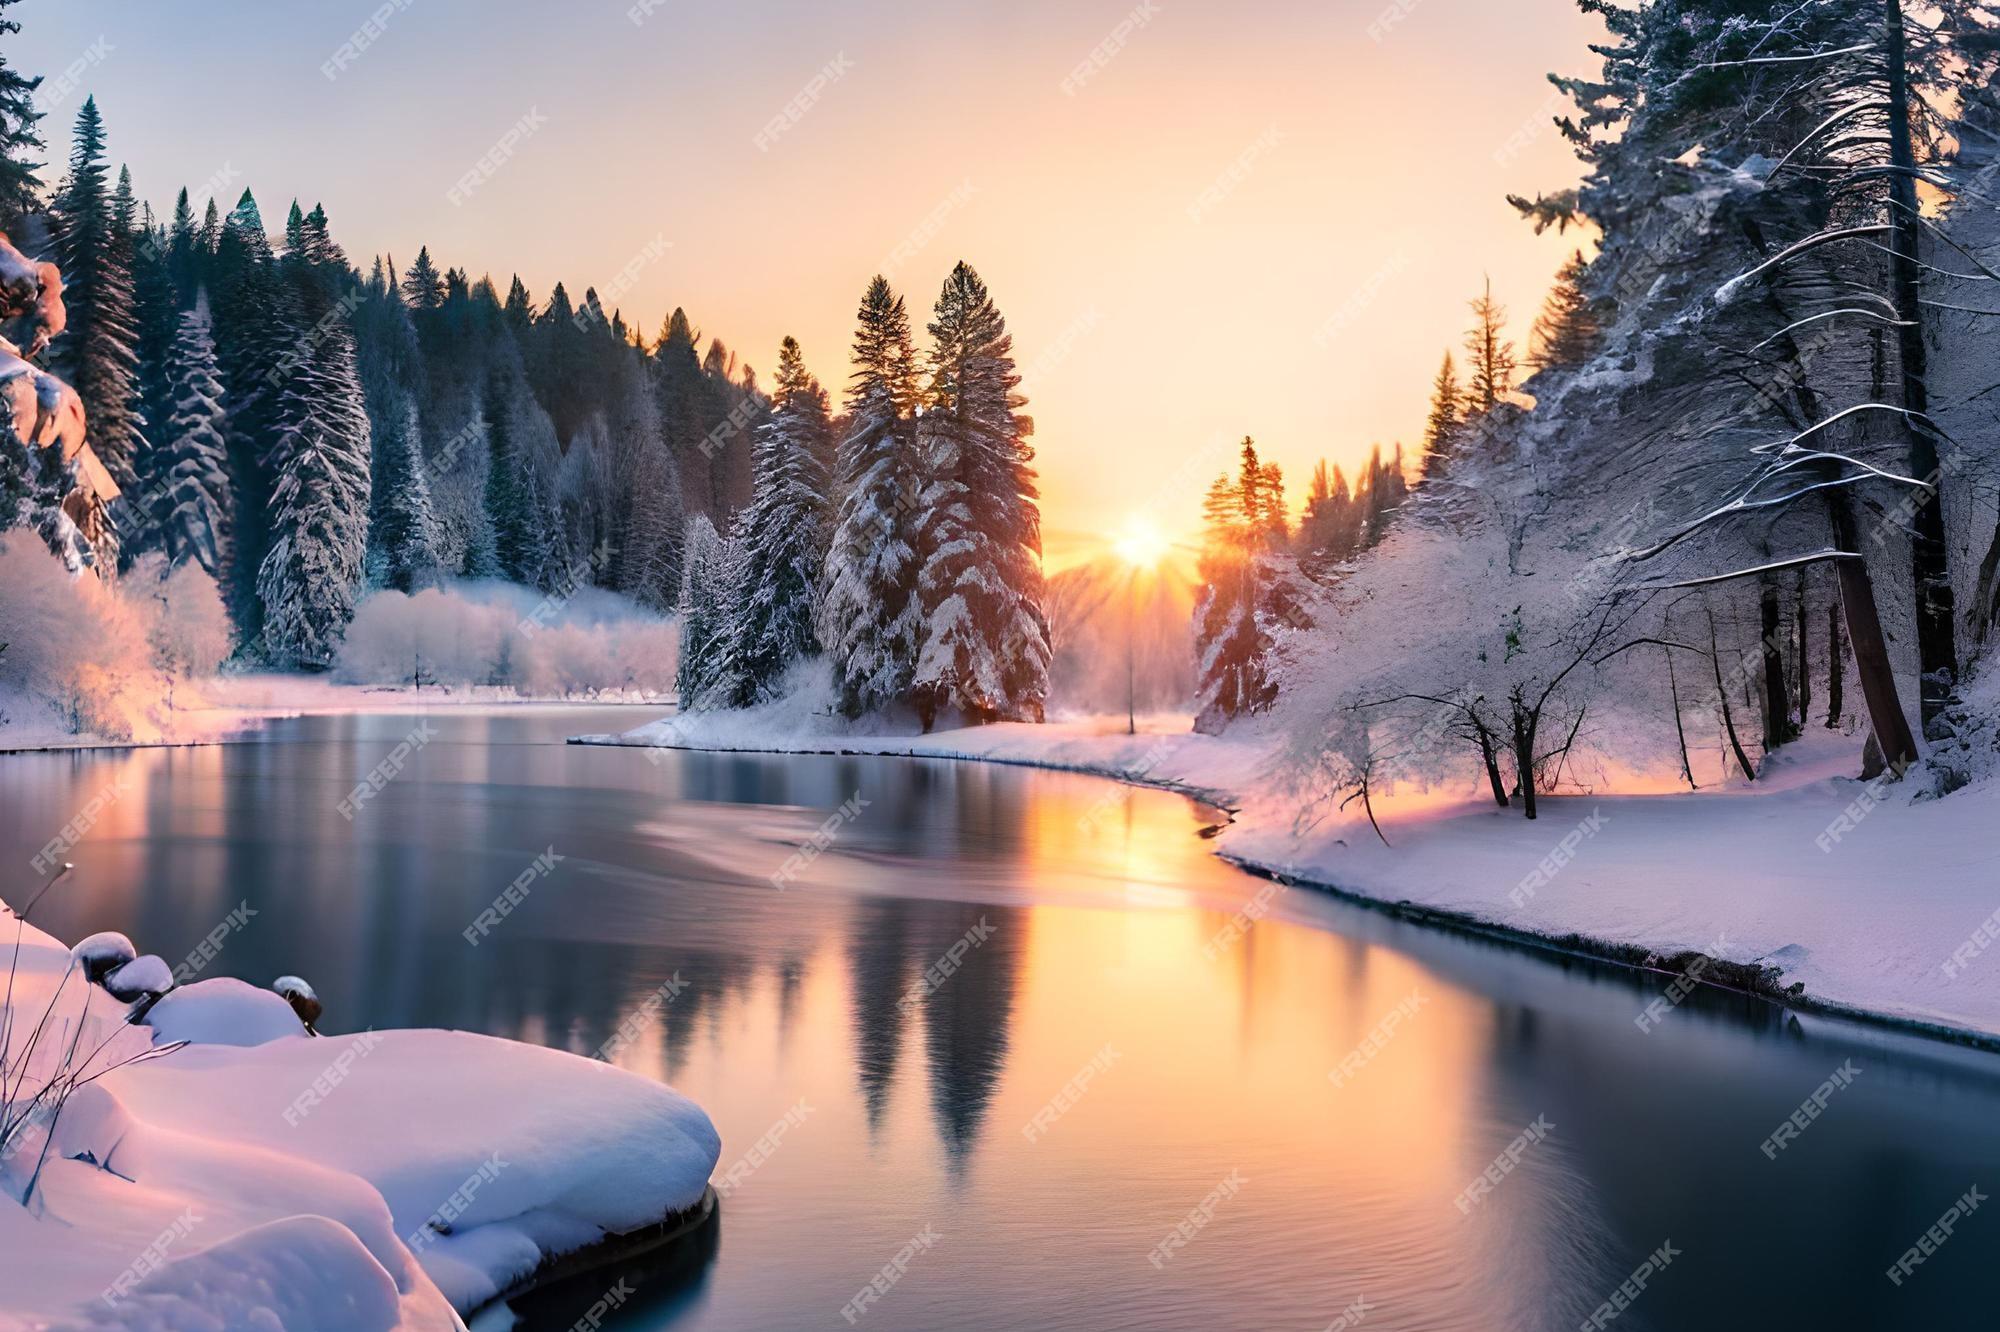 Premium Photo A winter scene with a river and trees in the